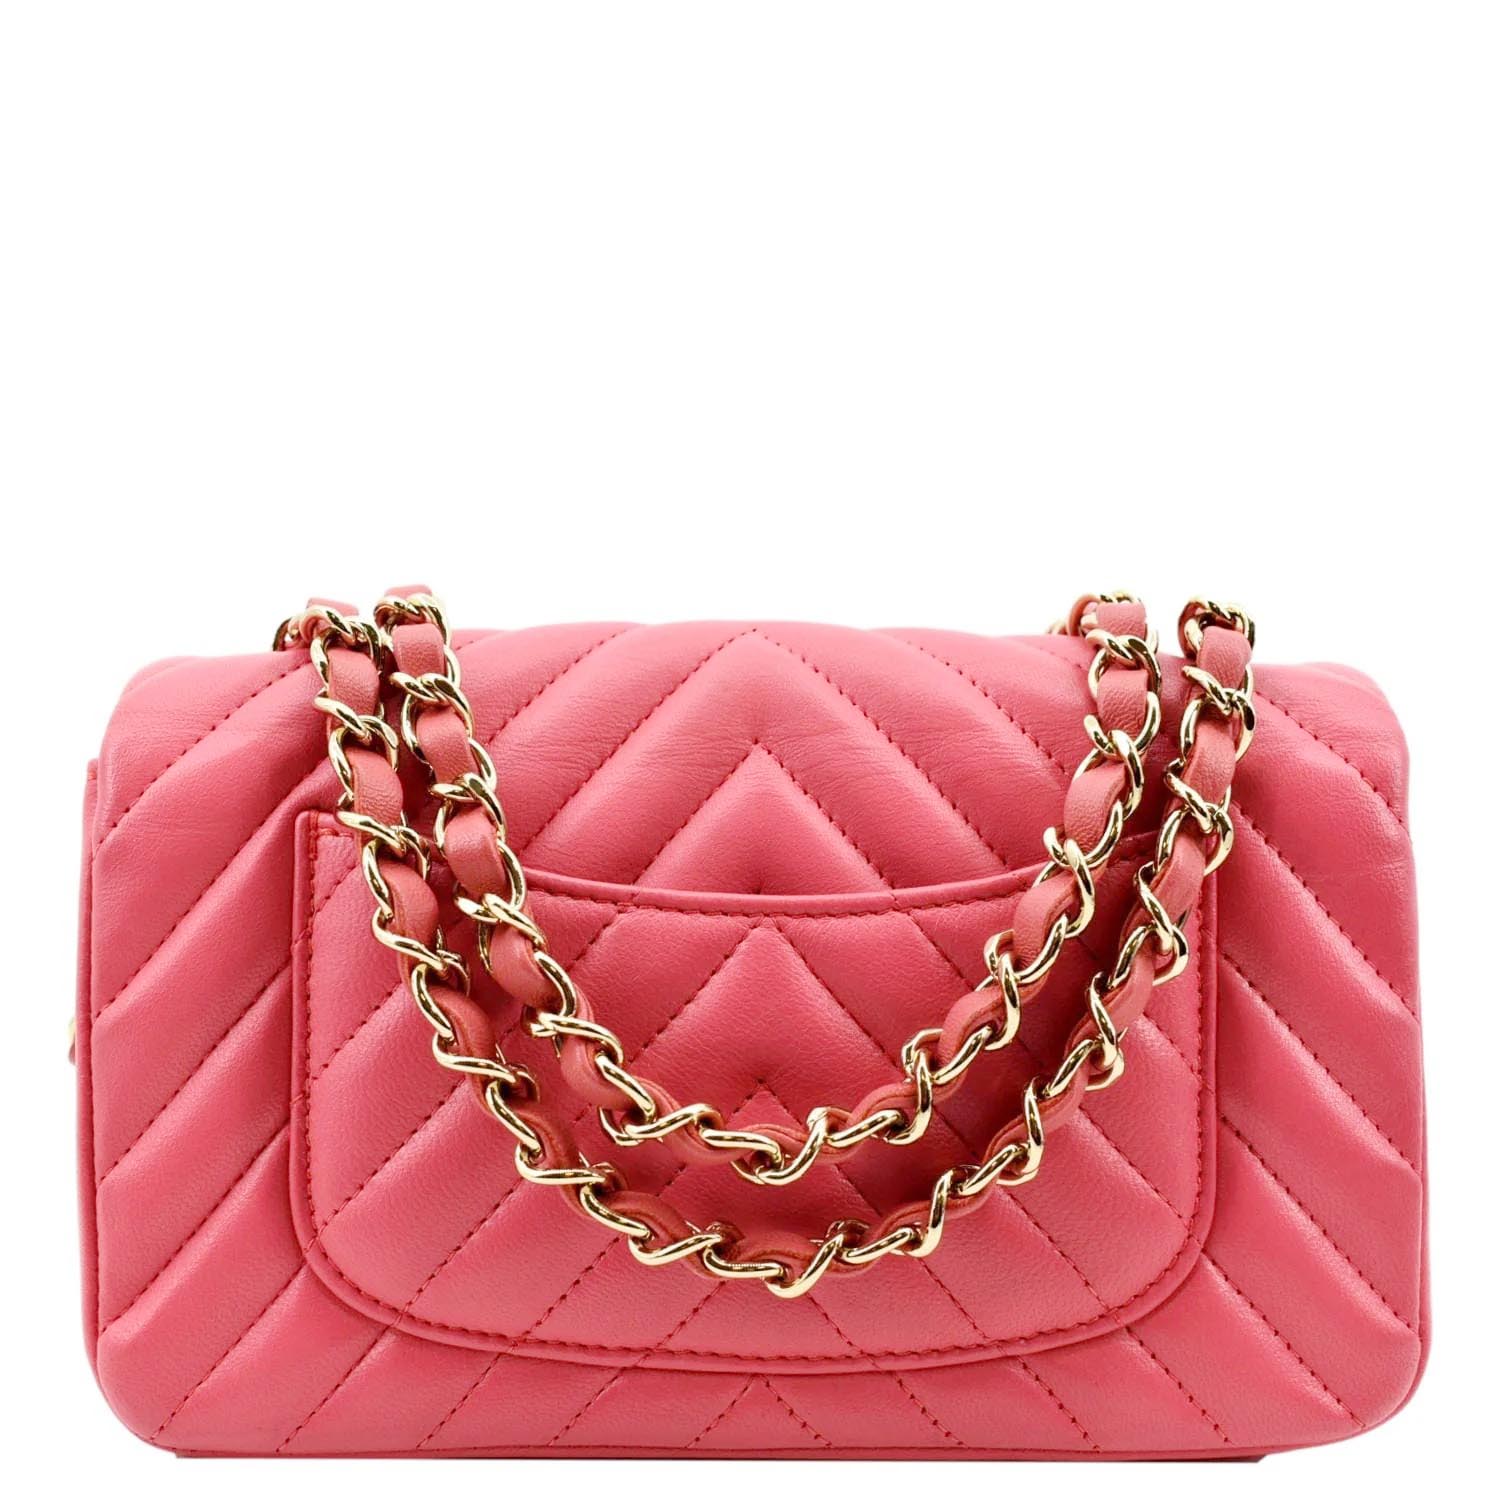 Chanel Purple Quilted Leather New Mini Classic Single Flap Bag Chanel